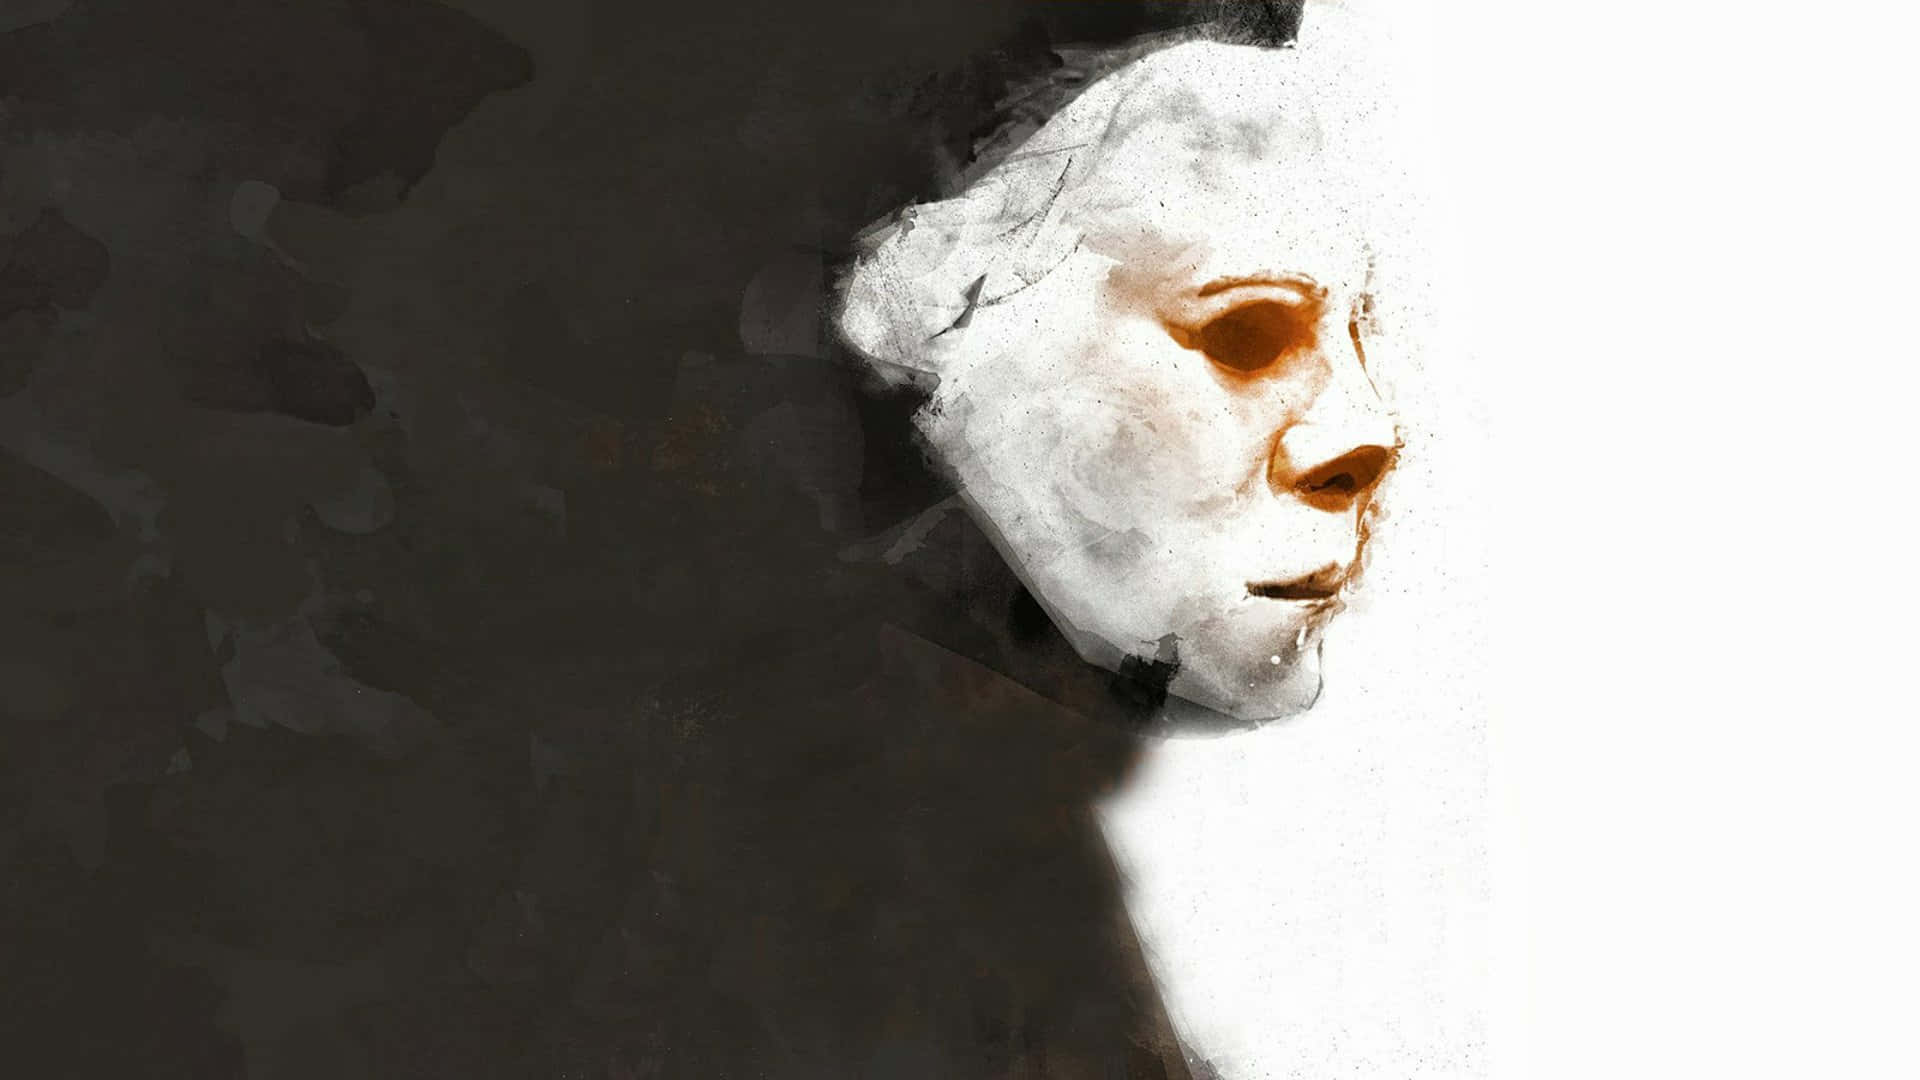 "Michael Myers returns yet again in this terrifying Halloween installation"